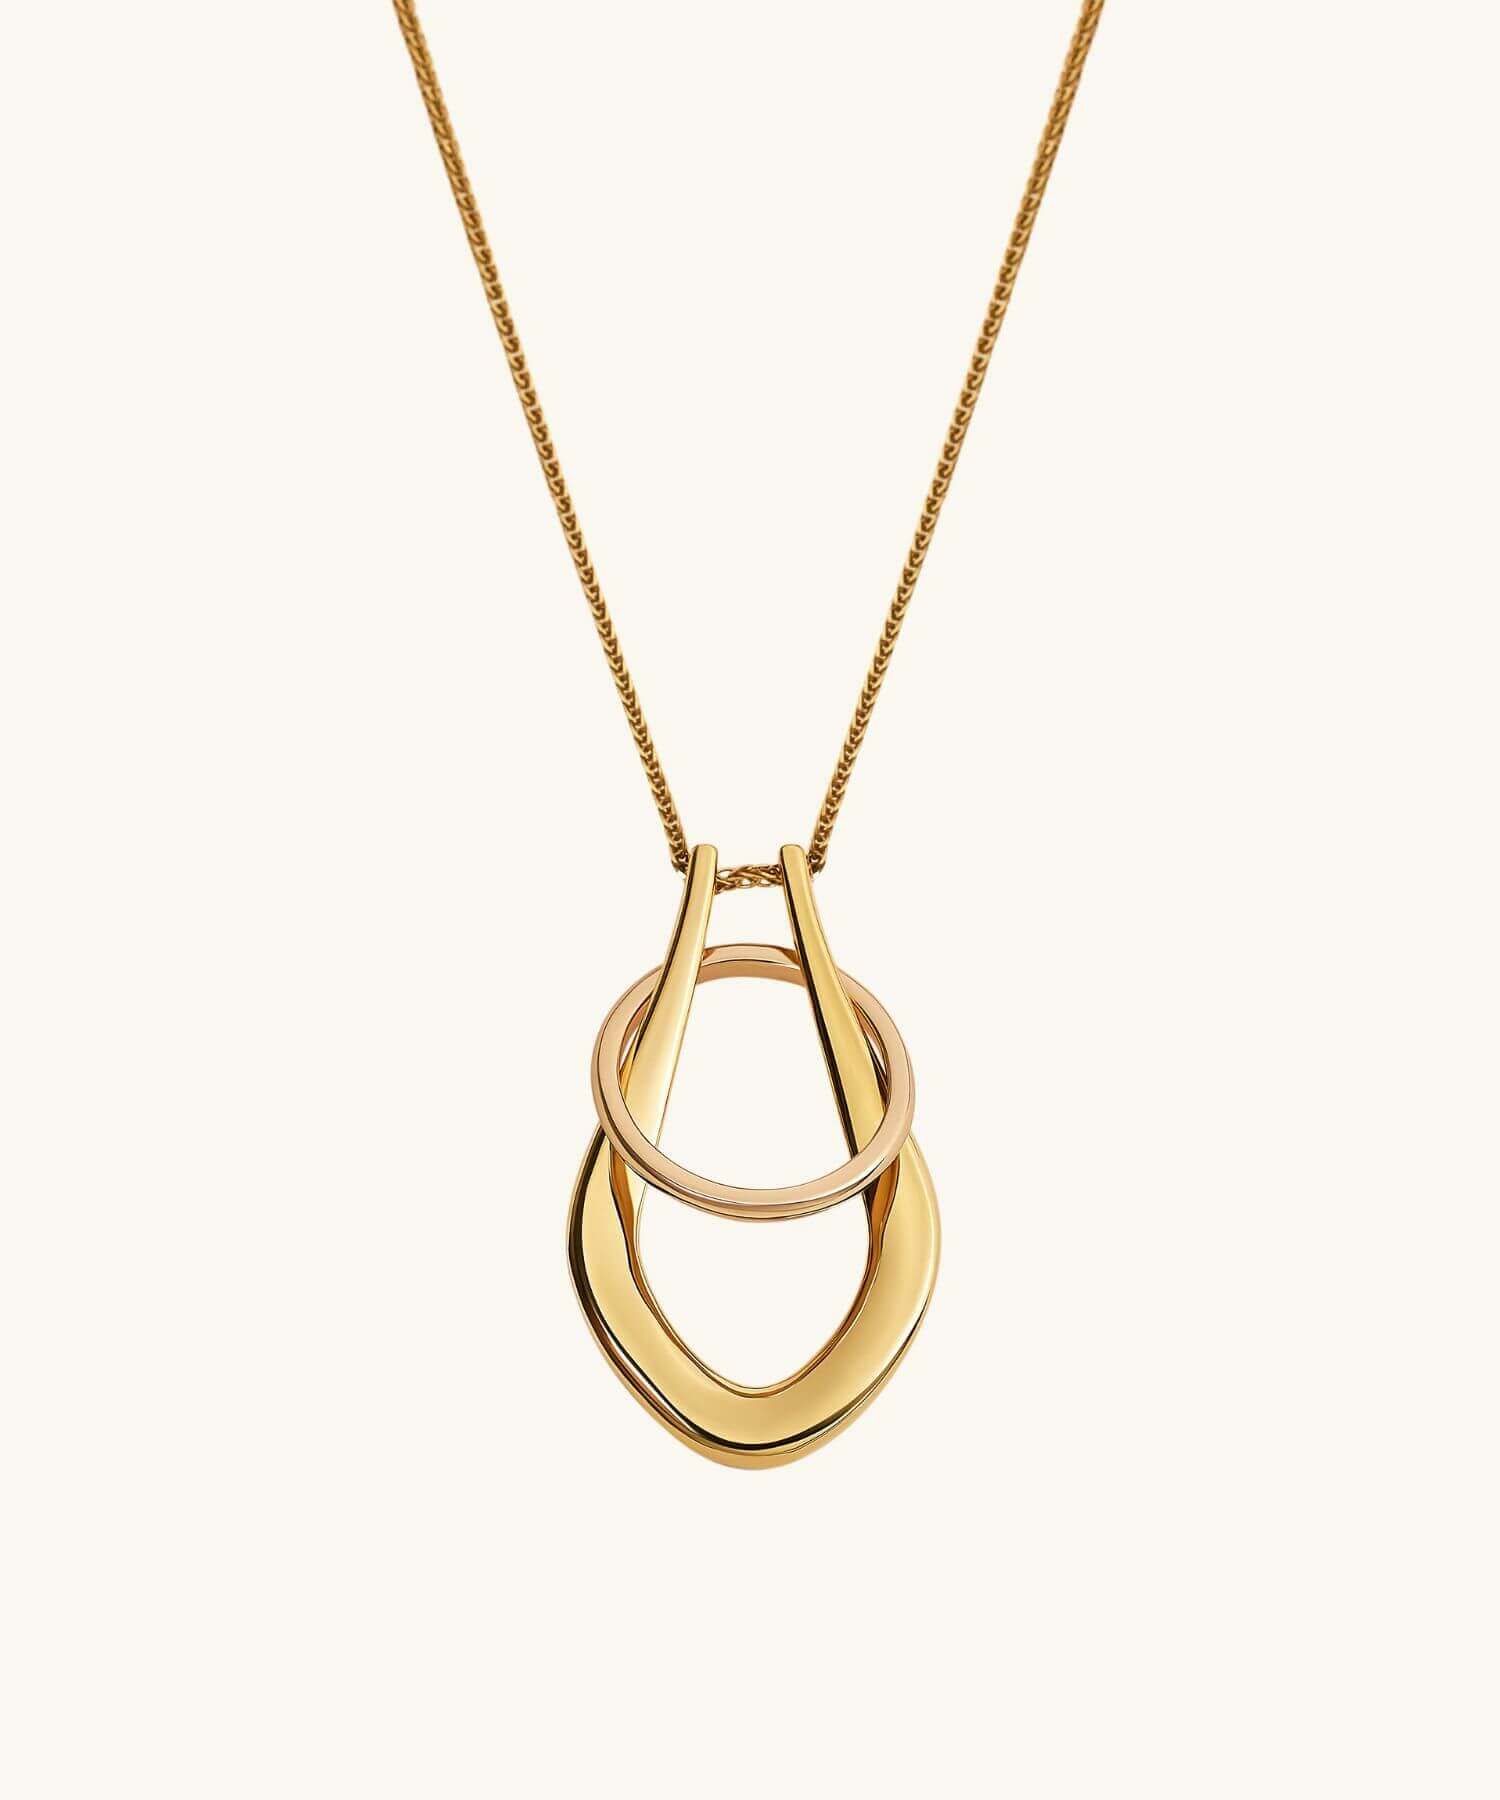 Want to have a ring holder necklace similar to this made (with a small  moissanite) - will it scratch my rings if they're both 14k white gold or if  the necklace is